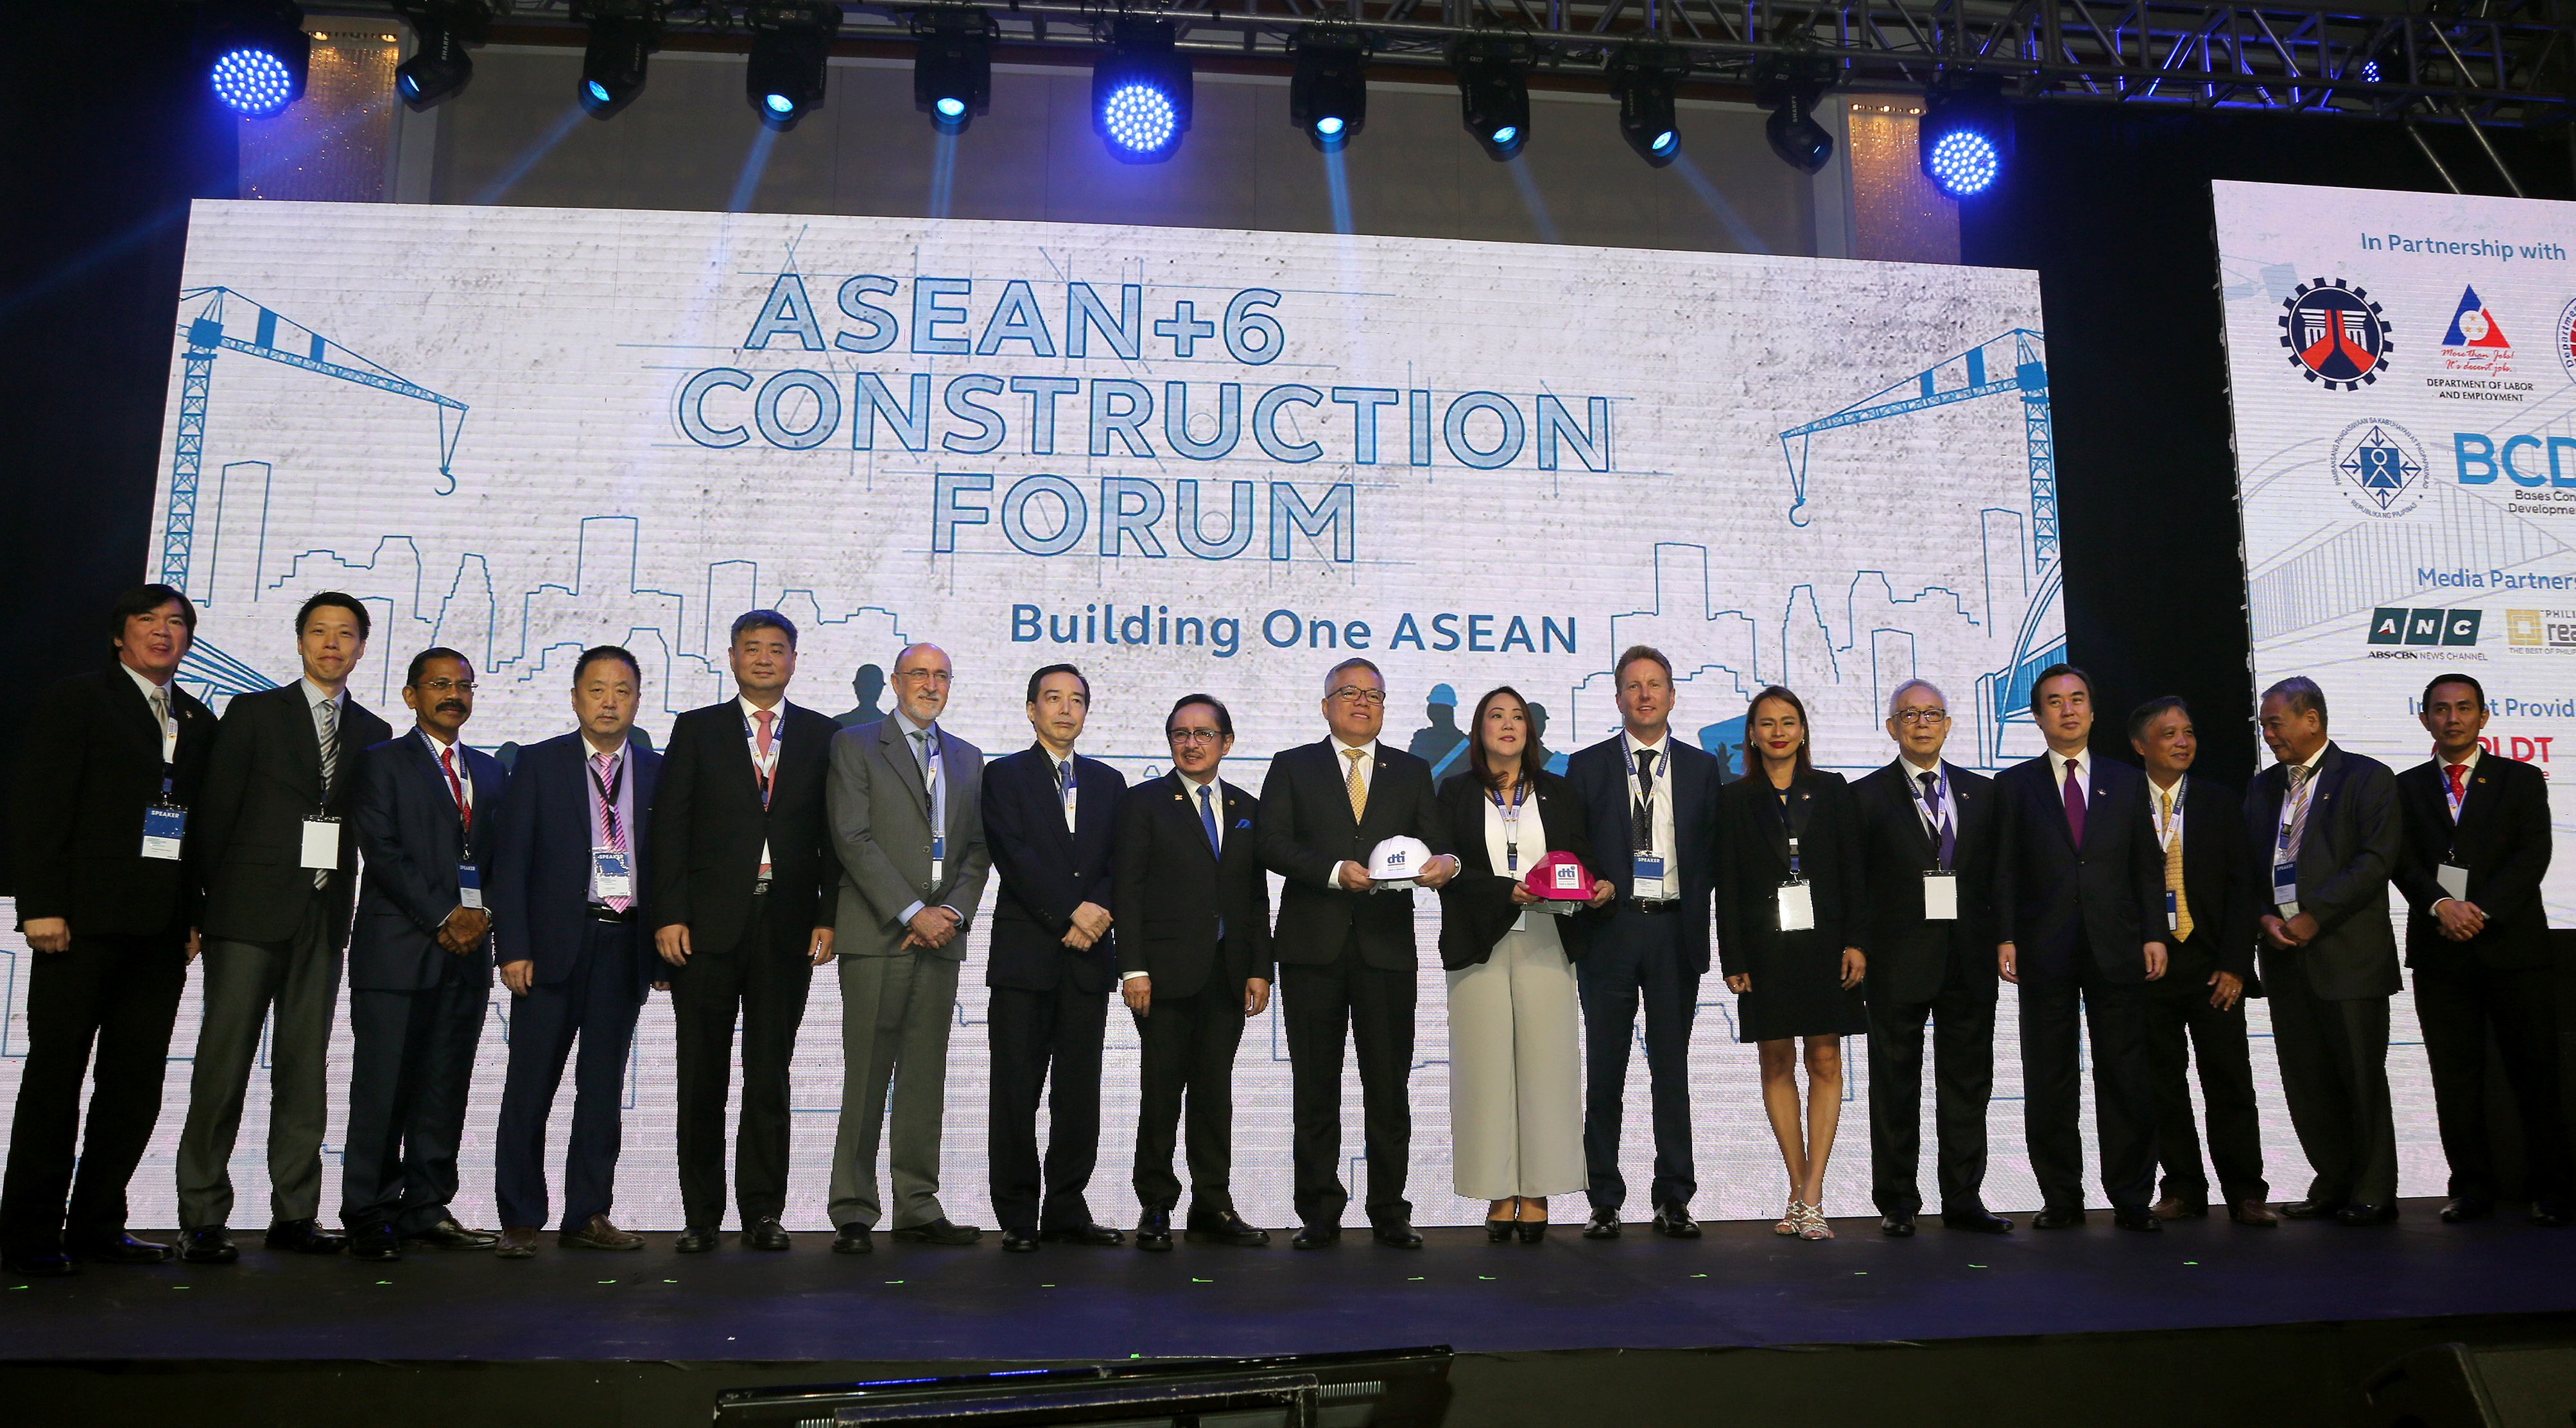 Leaders converge at the ASEAN +6 Forum